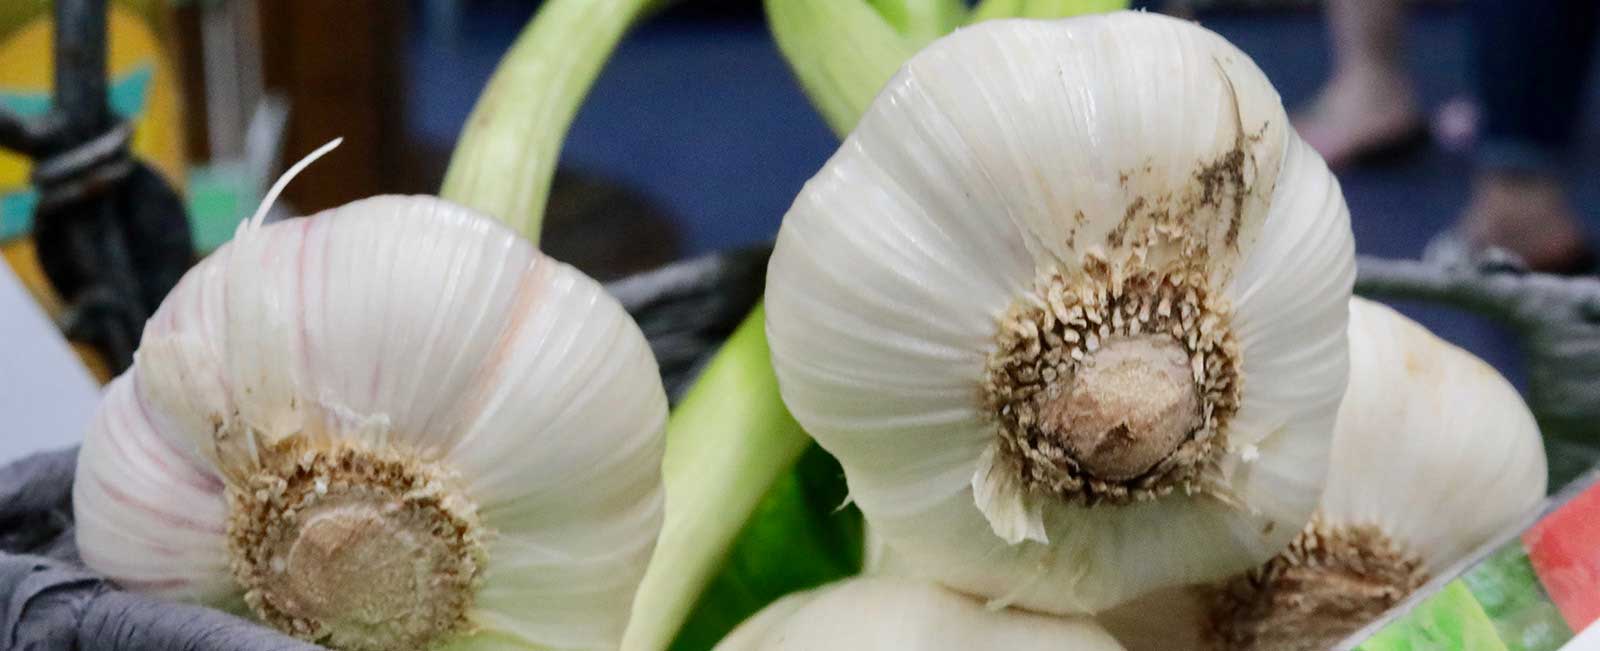  Did you know that garlic has a lot of health benefits? We like to say, A clove of garlic a day, keeps the doctor away.